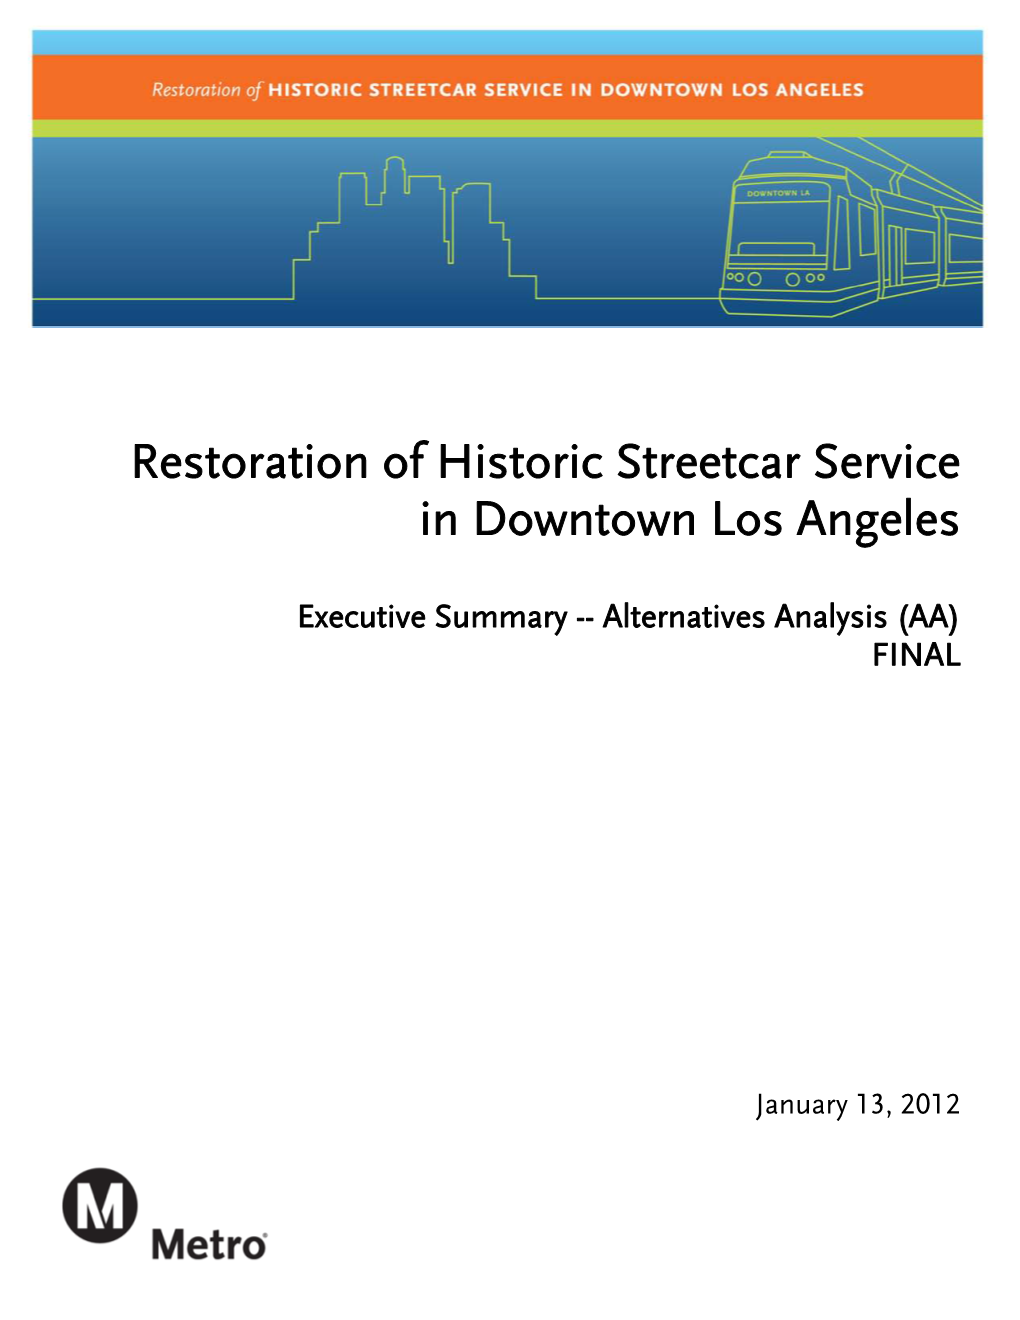 Restoration of Historic Streetcar Service in Downtown Los Angeles